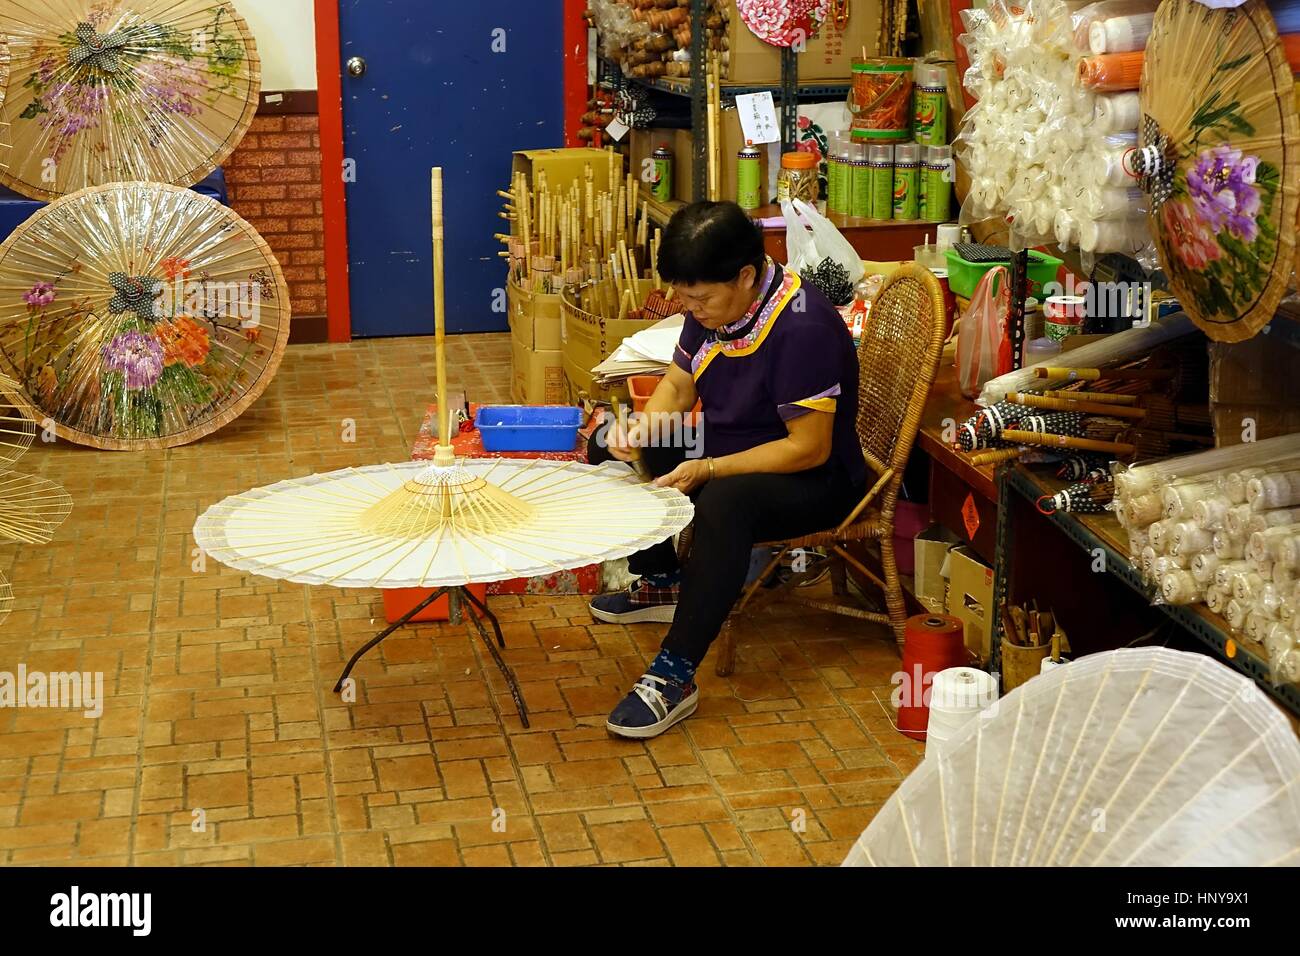 KAOHSIUNG, TAIWAN -- JULY 24, 2016: A female craftsperson makes oil-paper umbrellas, which is a traditional art and craft product by the Chinese Hakka Stock Photo